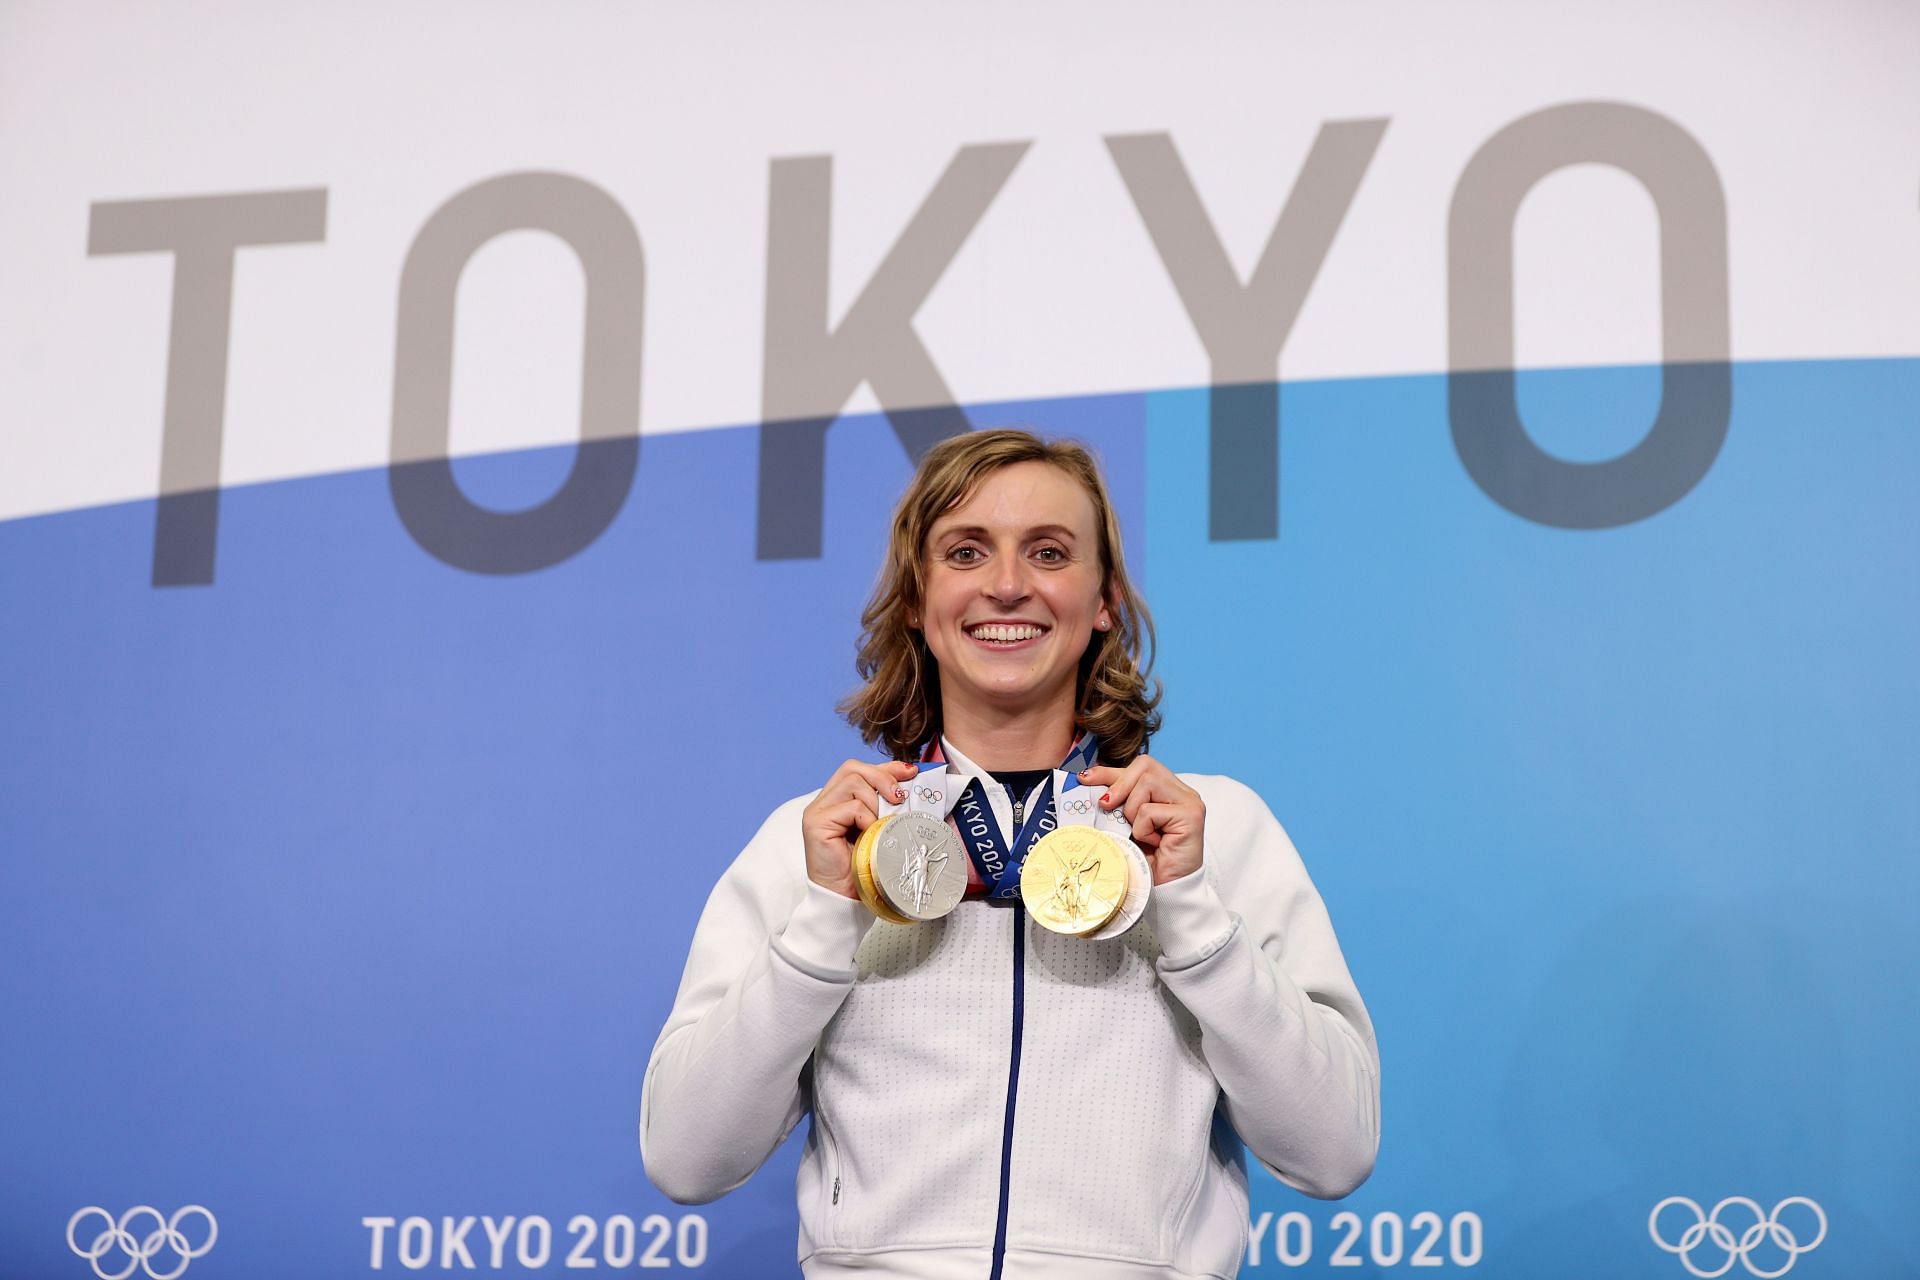 Ledecky at the Tokyo Olympics (Photo by Laurence Griffiths/Getty Images)